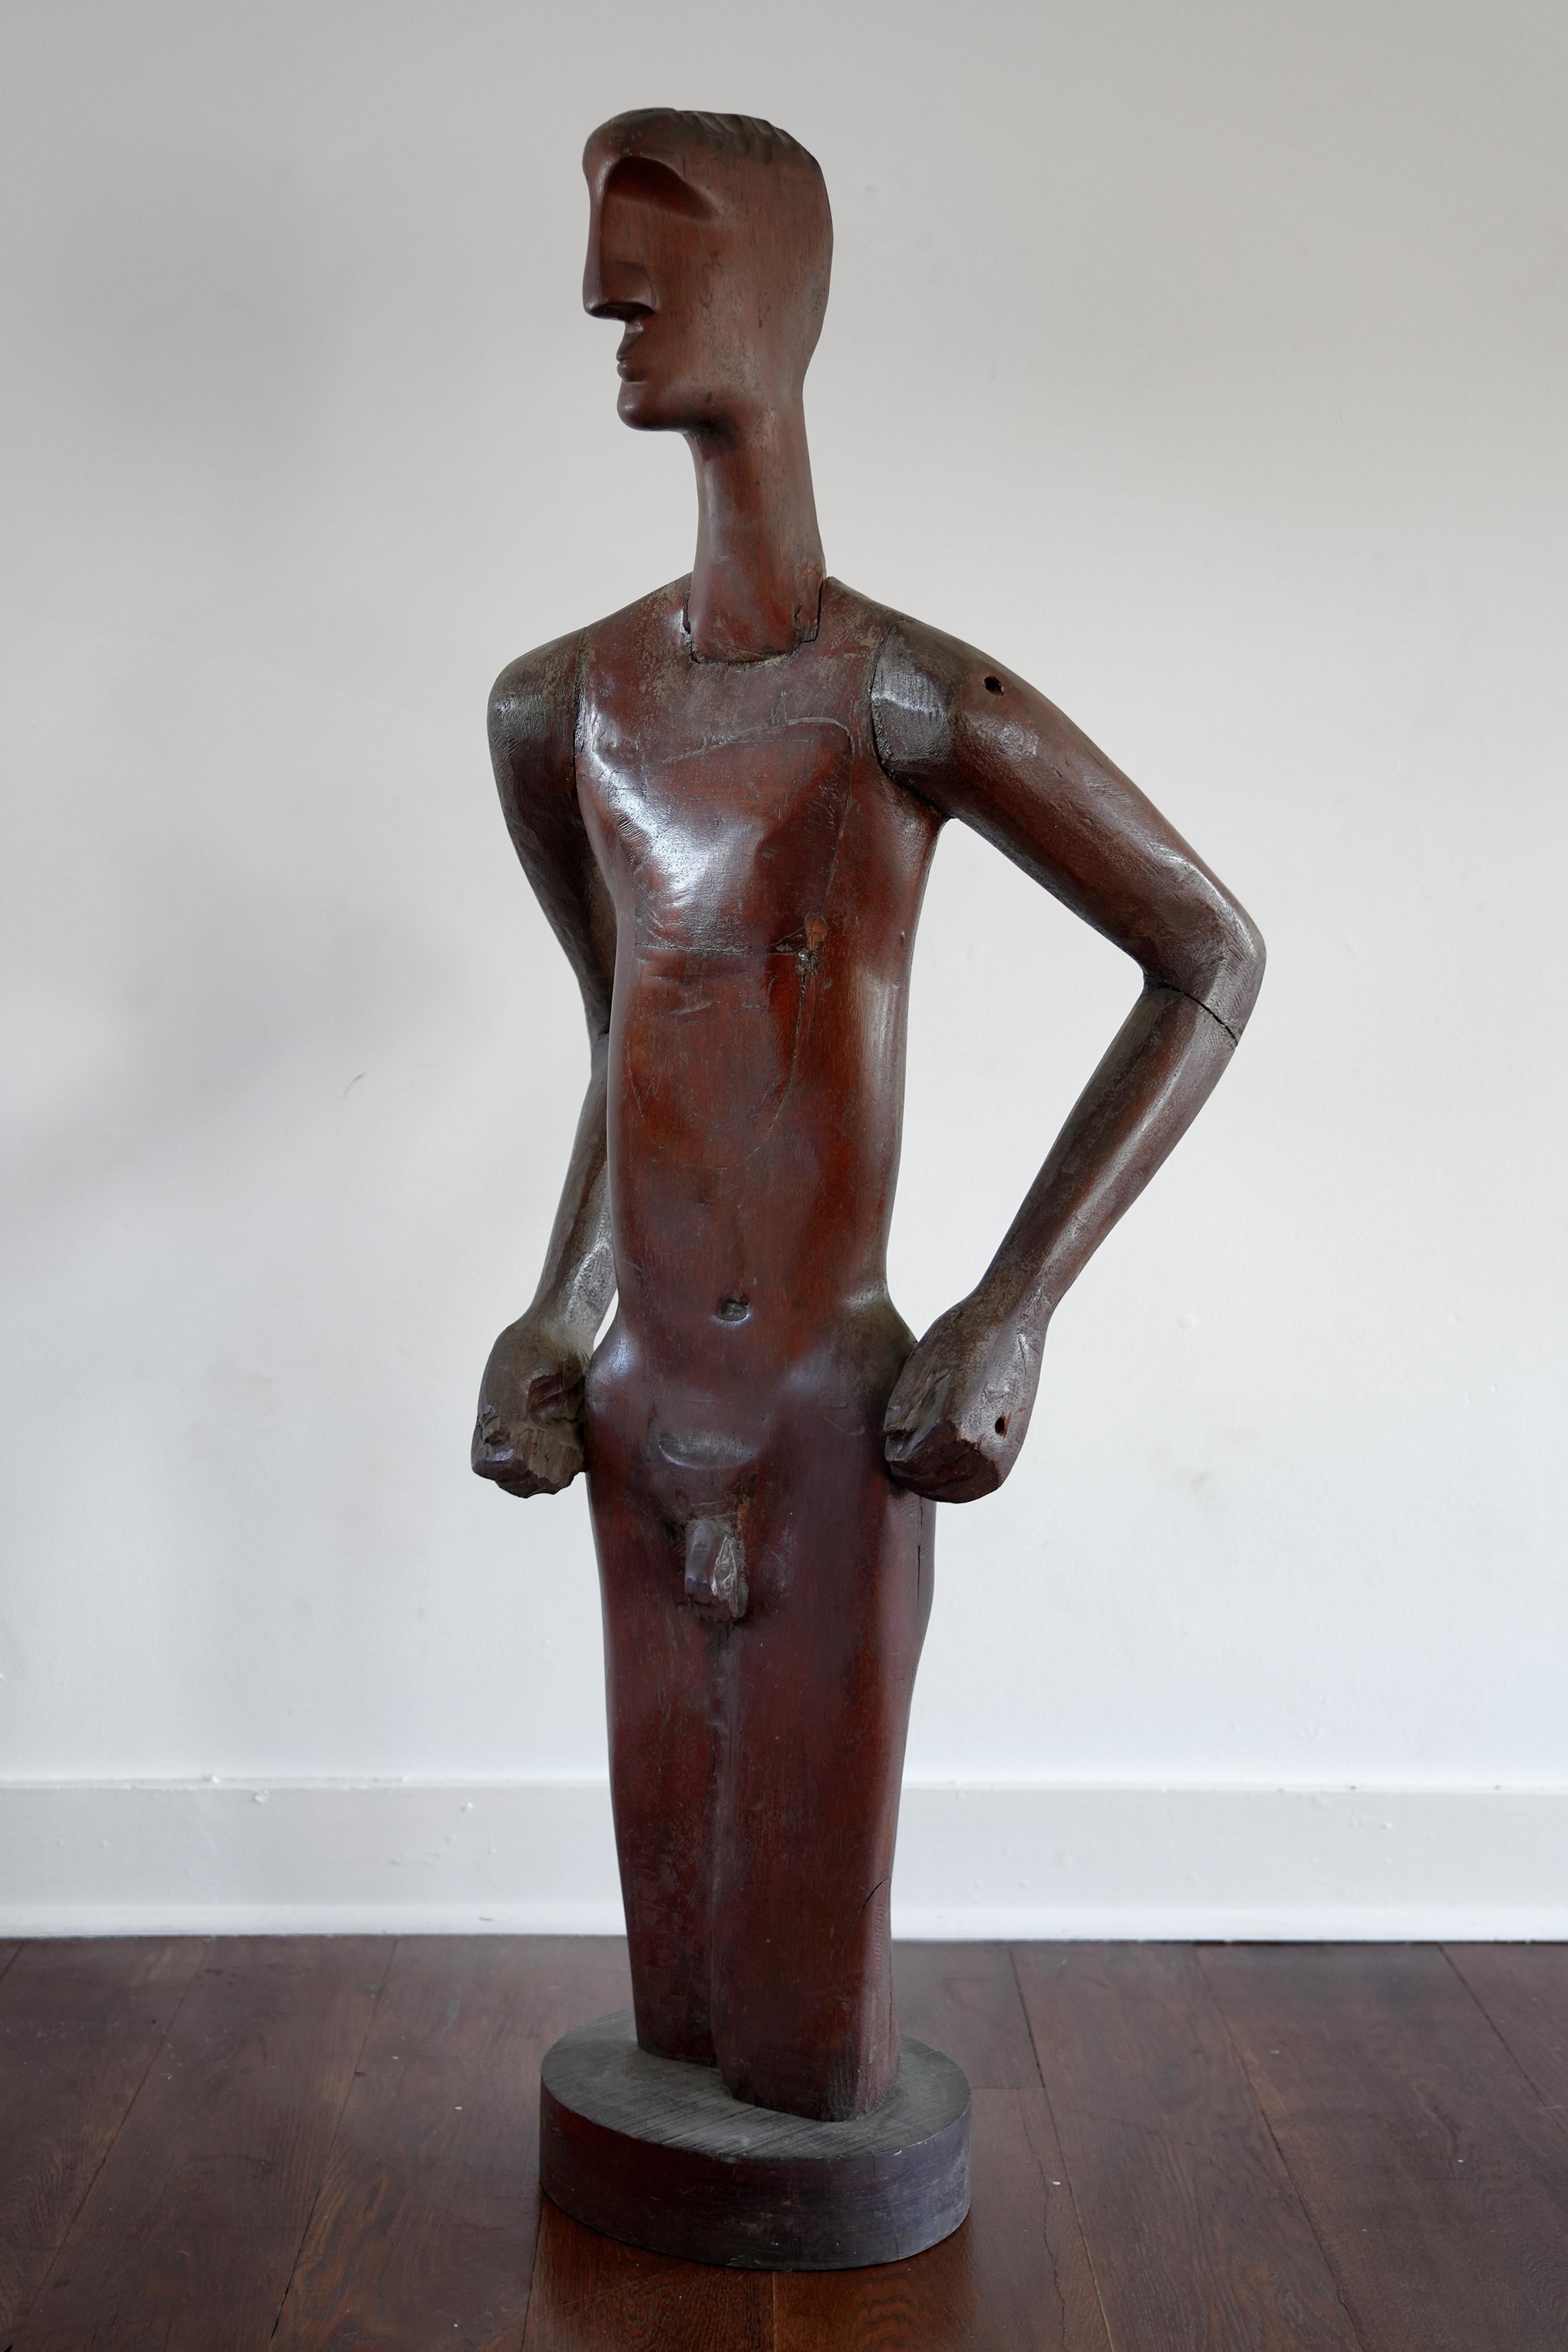 Folk Art Sculpture of a Man
Unsigned. This piece was found in the Catskill Mountains, NY.
He came from the estate of an important NYC modernist dealer.
Hand carved from what looks to be mahogany. Striking. Life size figure.